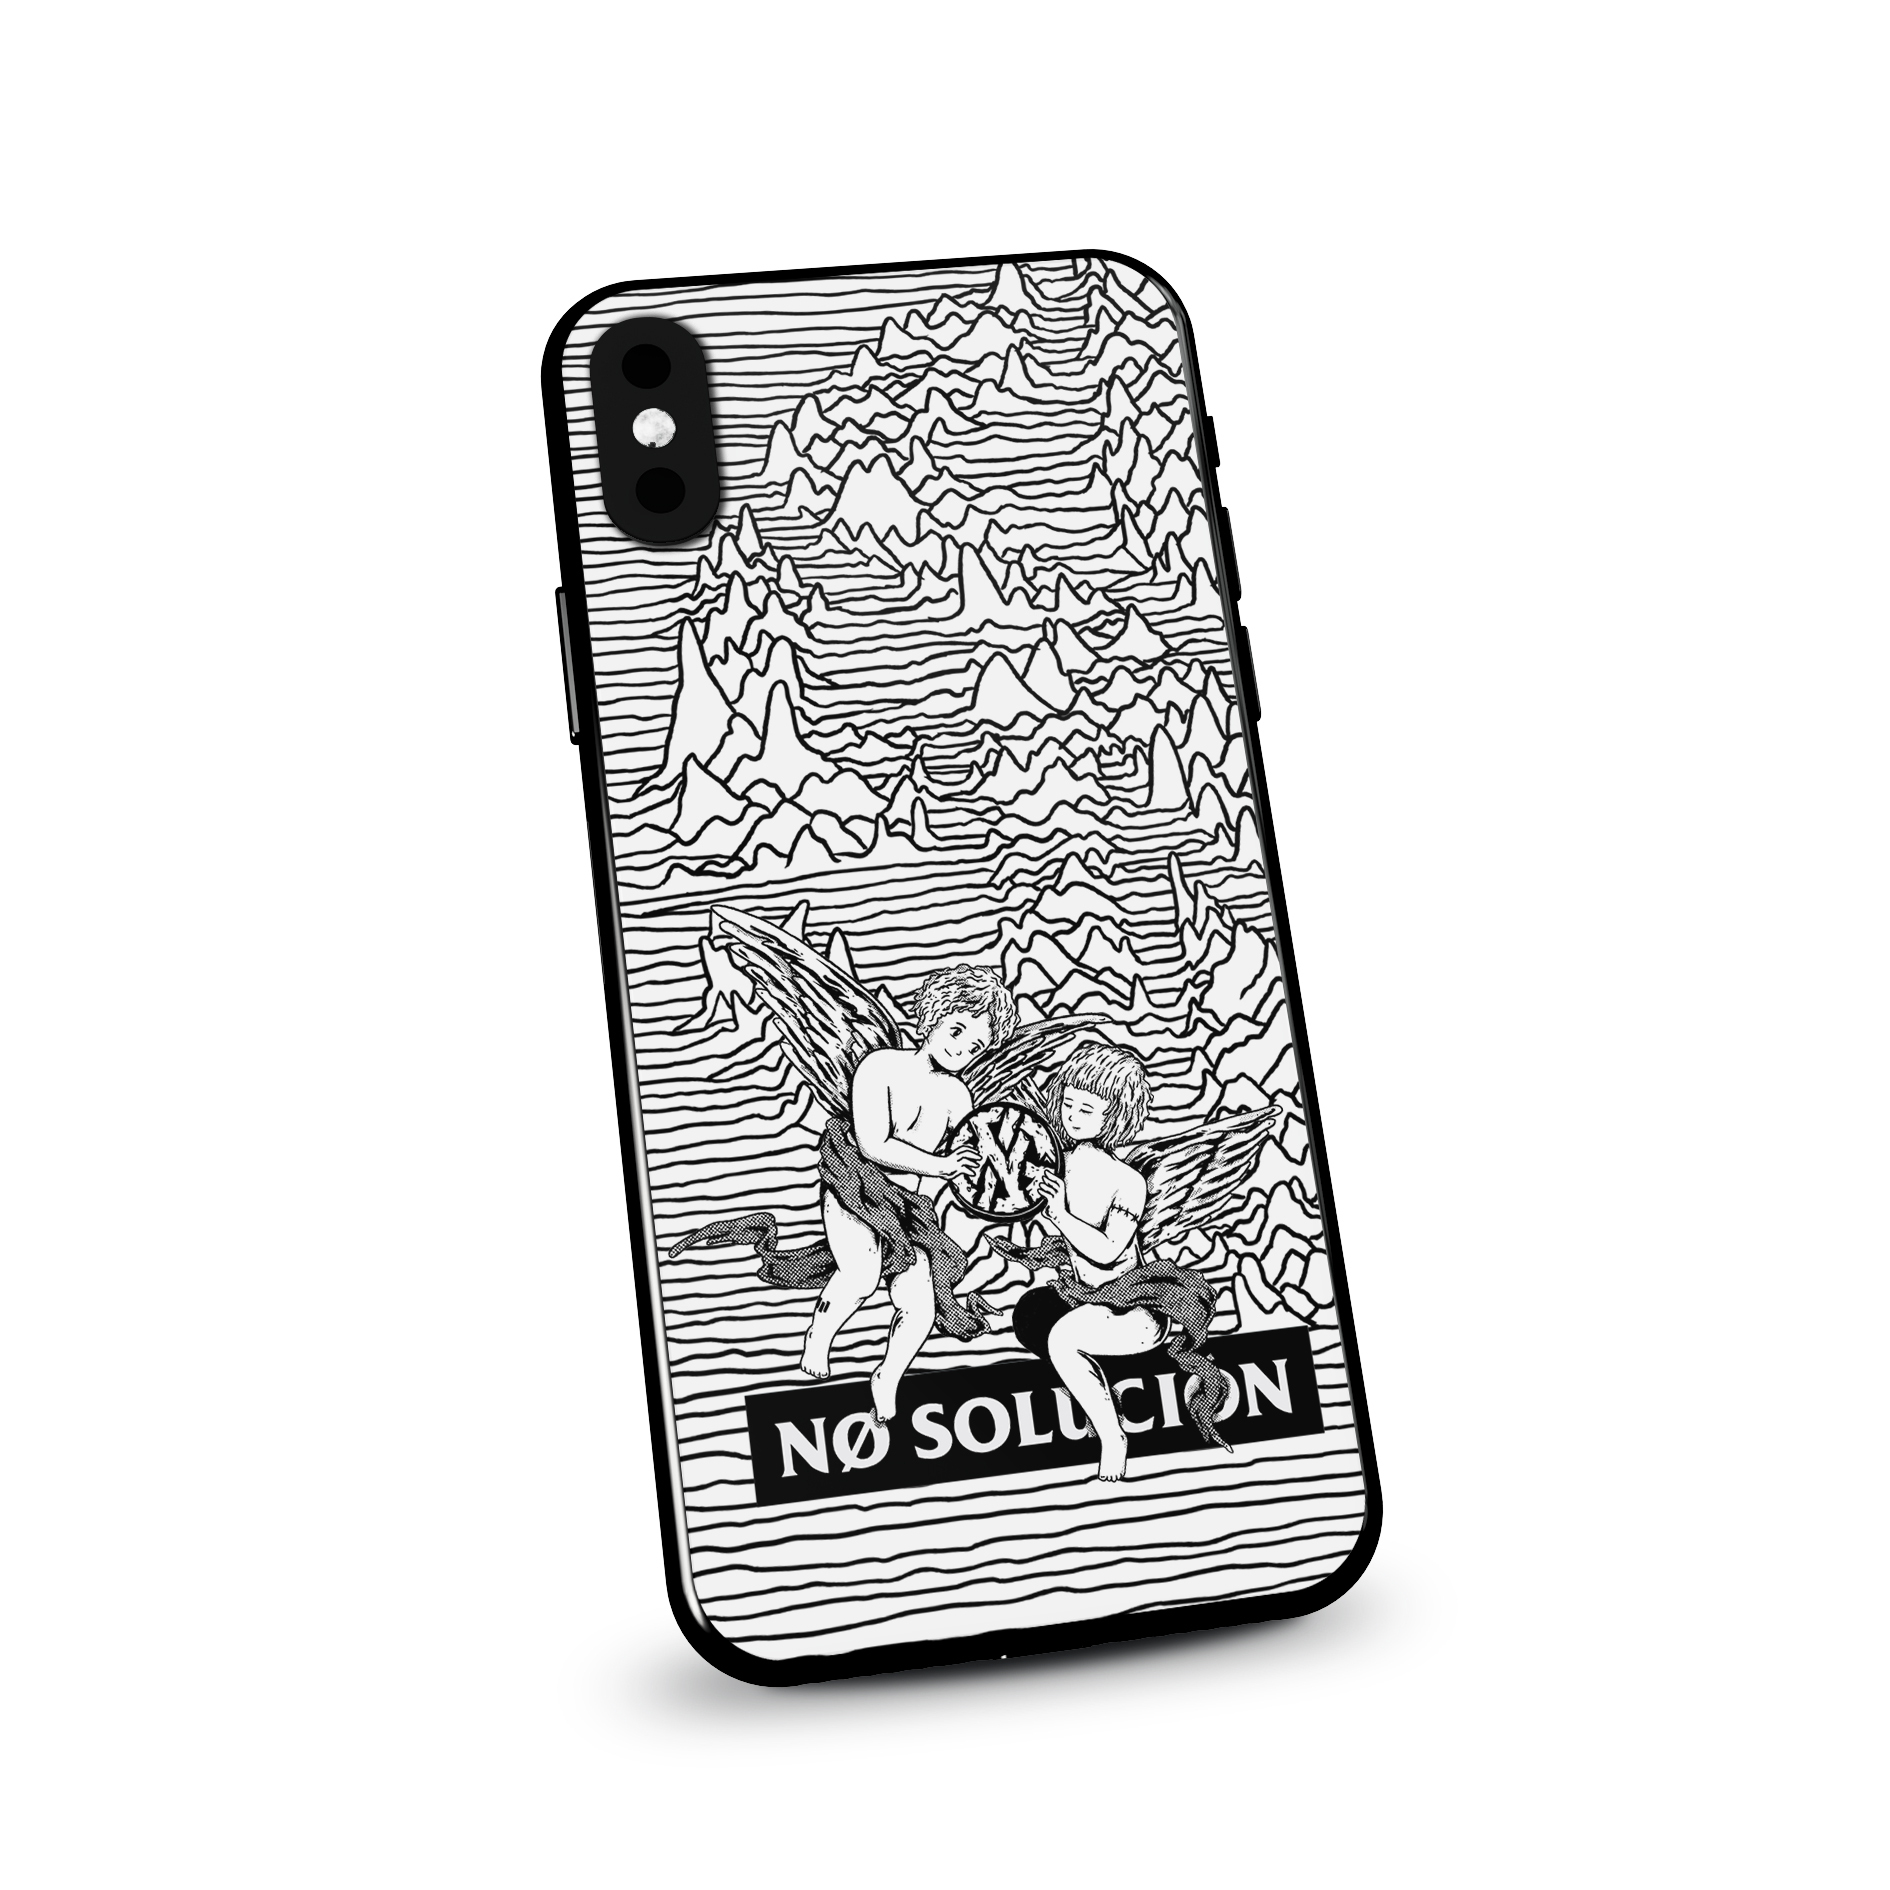 Phone Case NEW COLLECTION DEC 20222